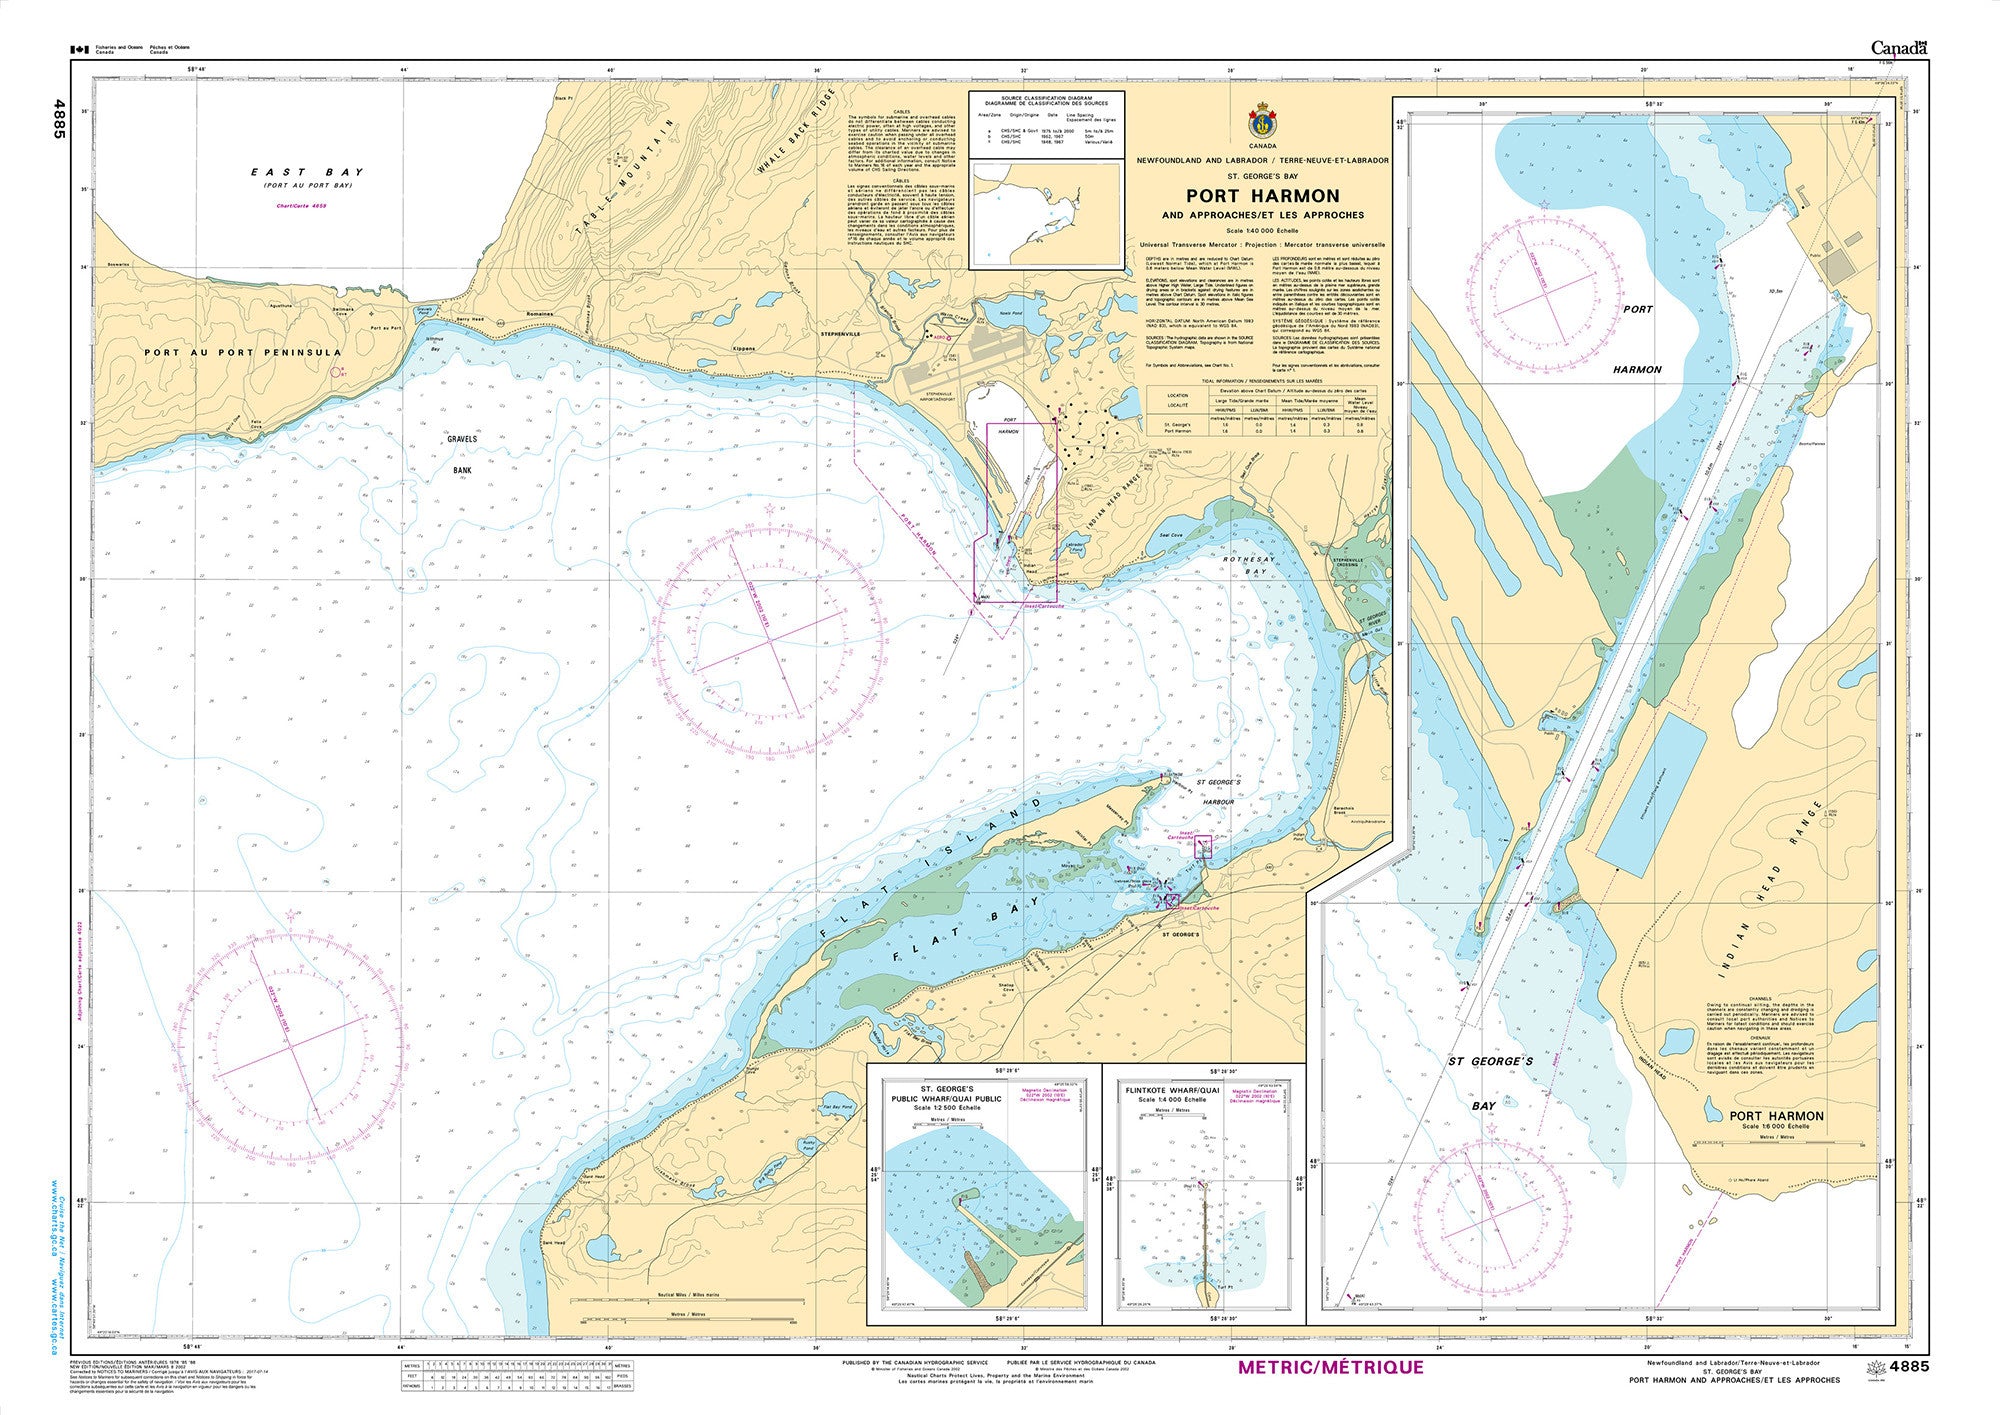 Canadian Hydrographic Service Nautical Chart CHS4885: Port Harmon and Approaches/et les approches